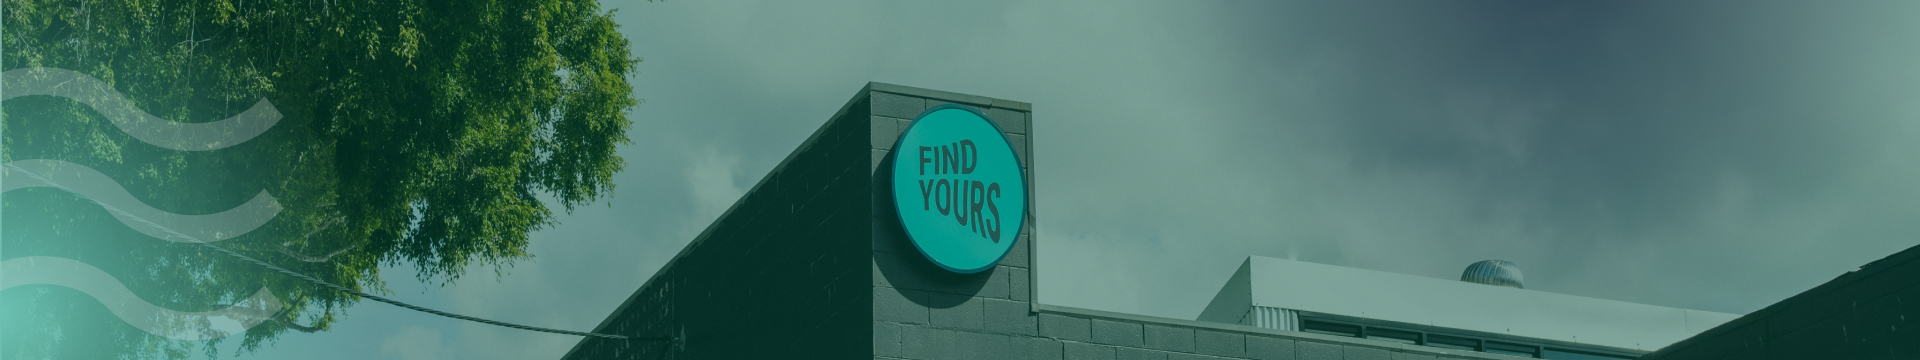 Closeup of the "Find Yours" sign on the front facade of the building